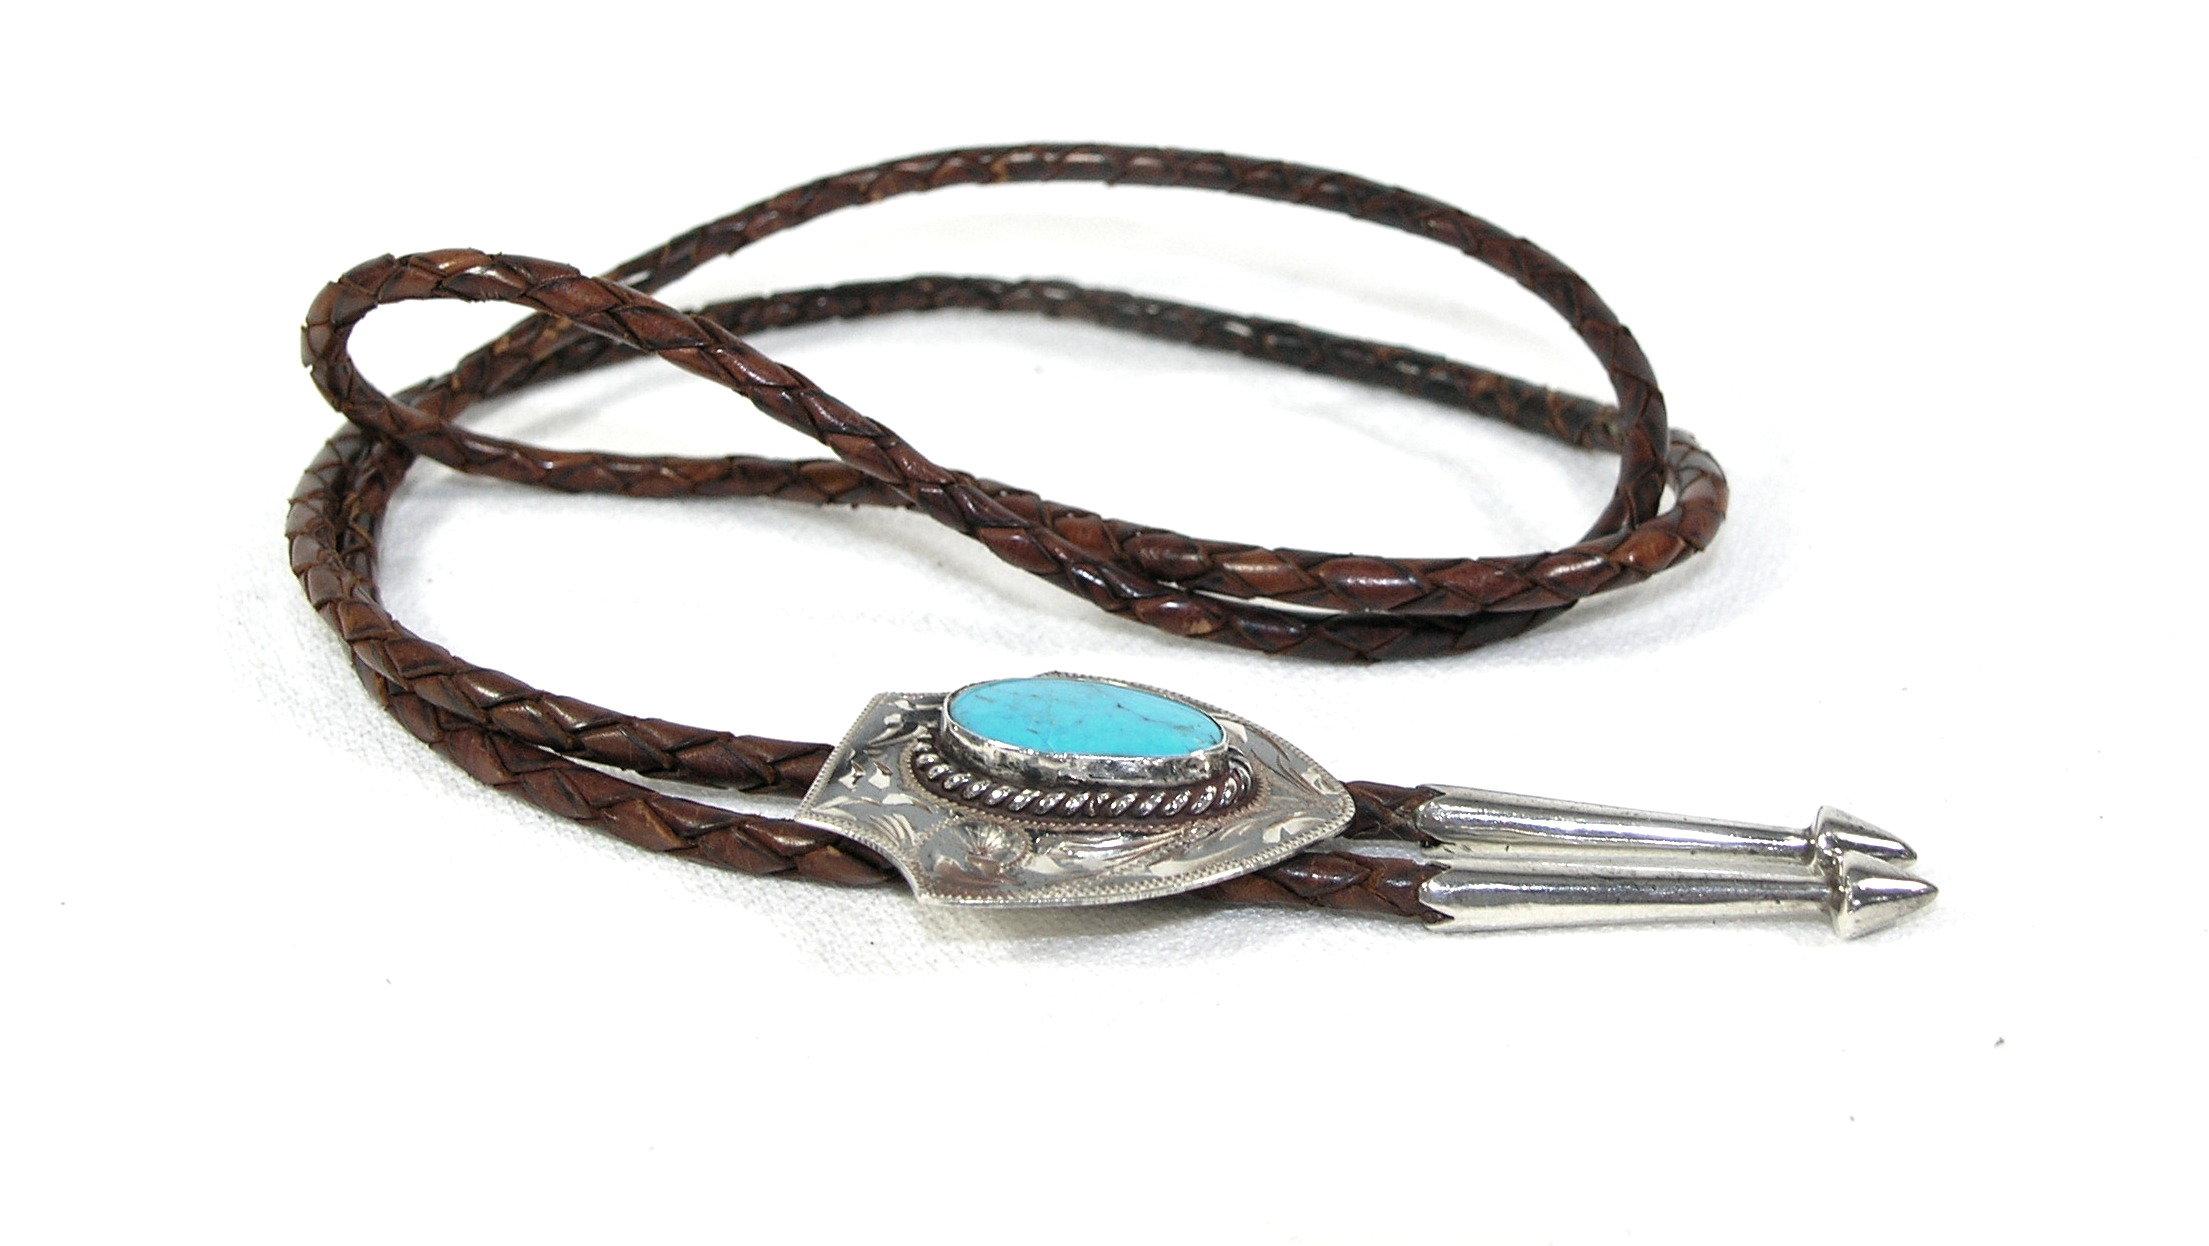 Vintage Southwest United States Brown Leather Bolo Tie With Arrowhead Shape